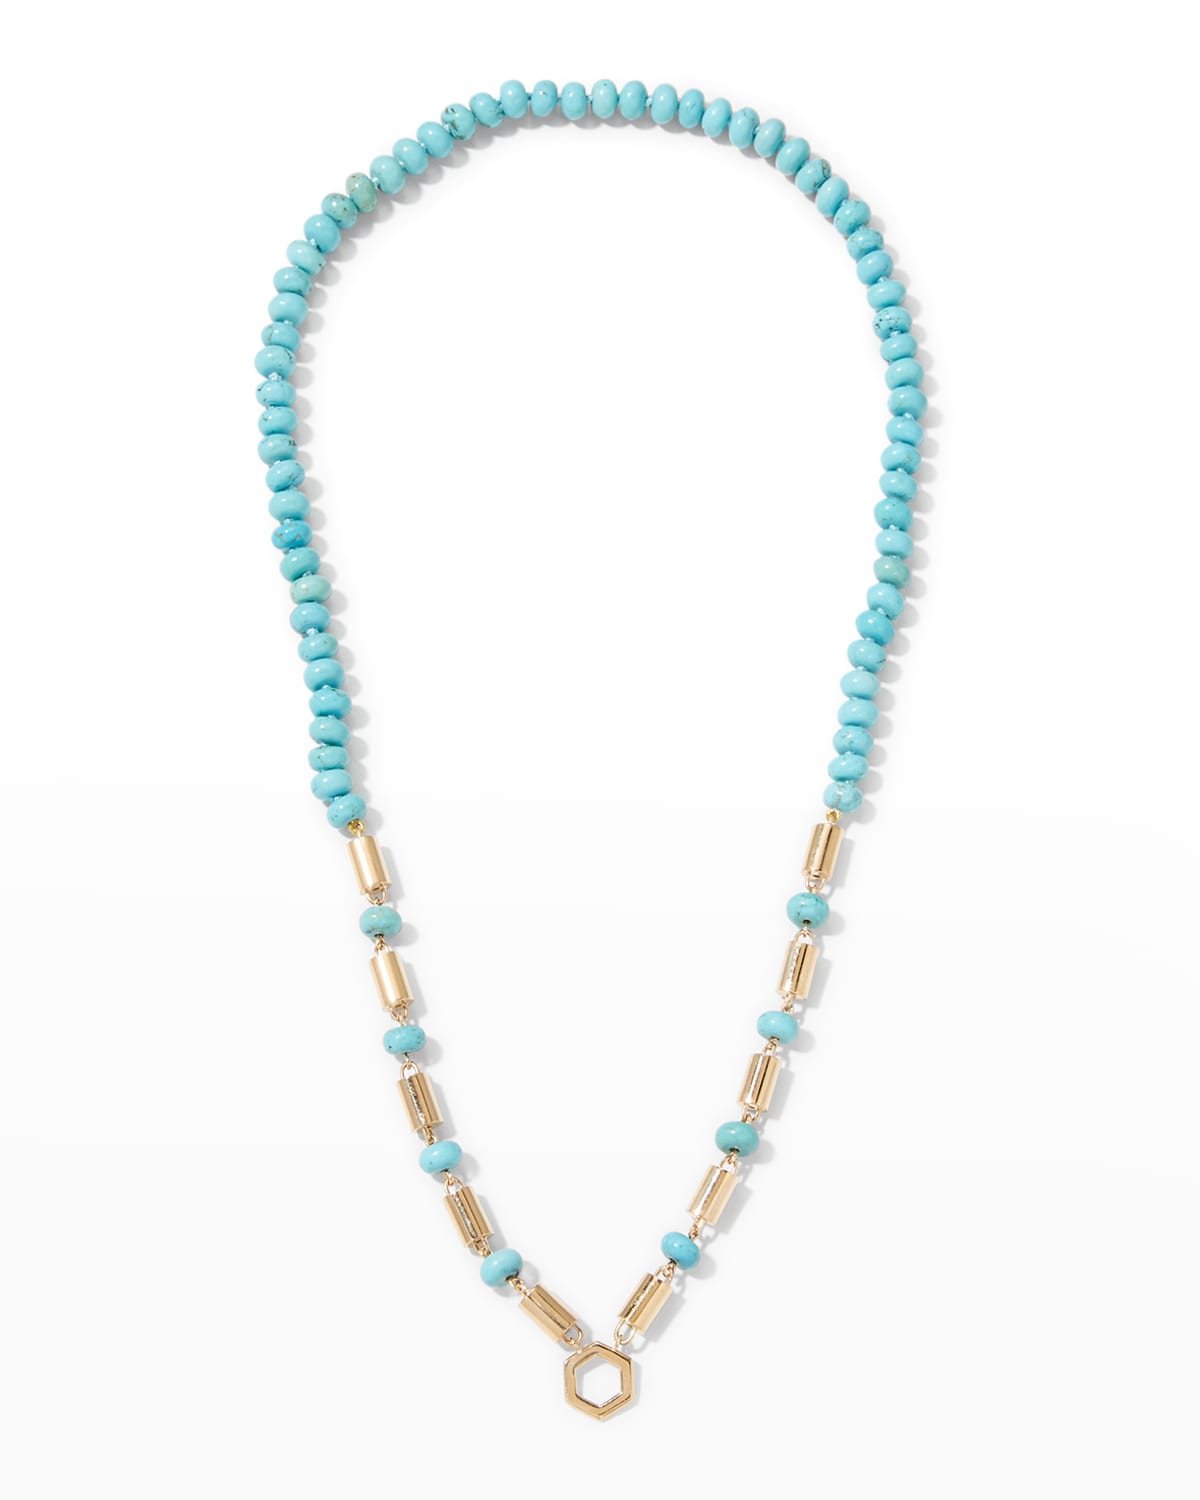 Harwell Godfrey Yellow Gold Baht Chain with Turquoise